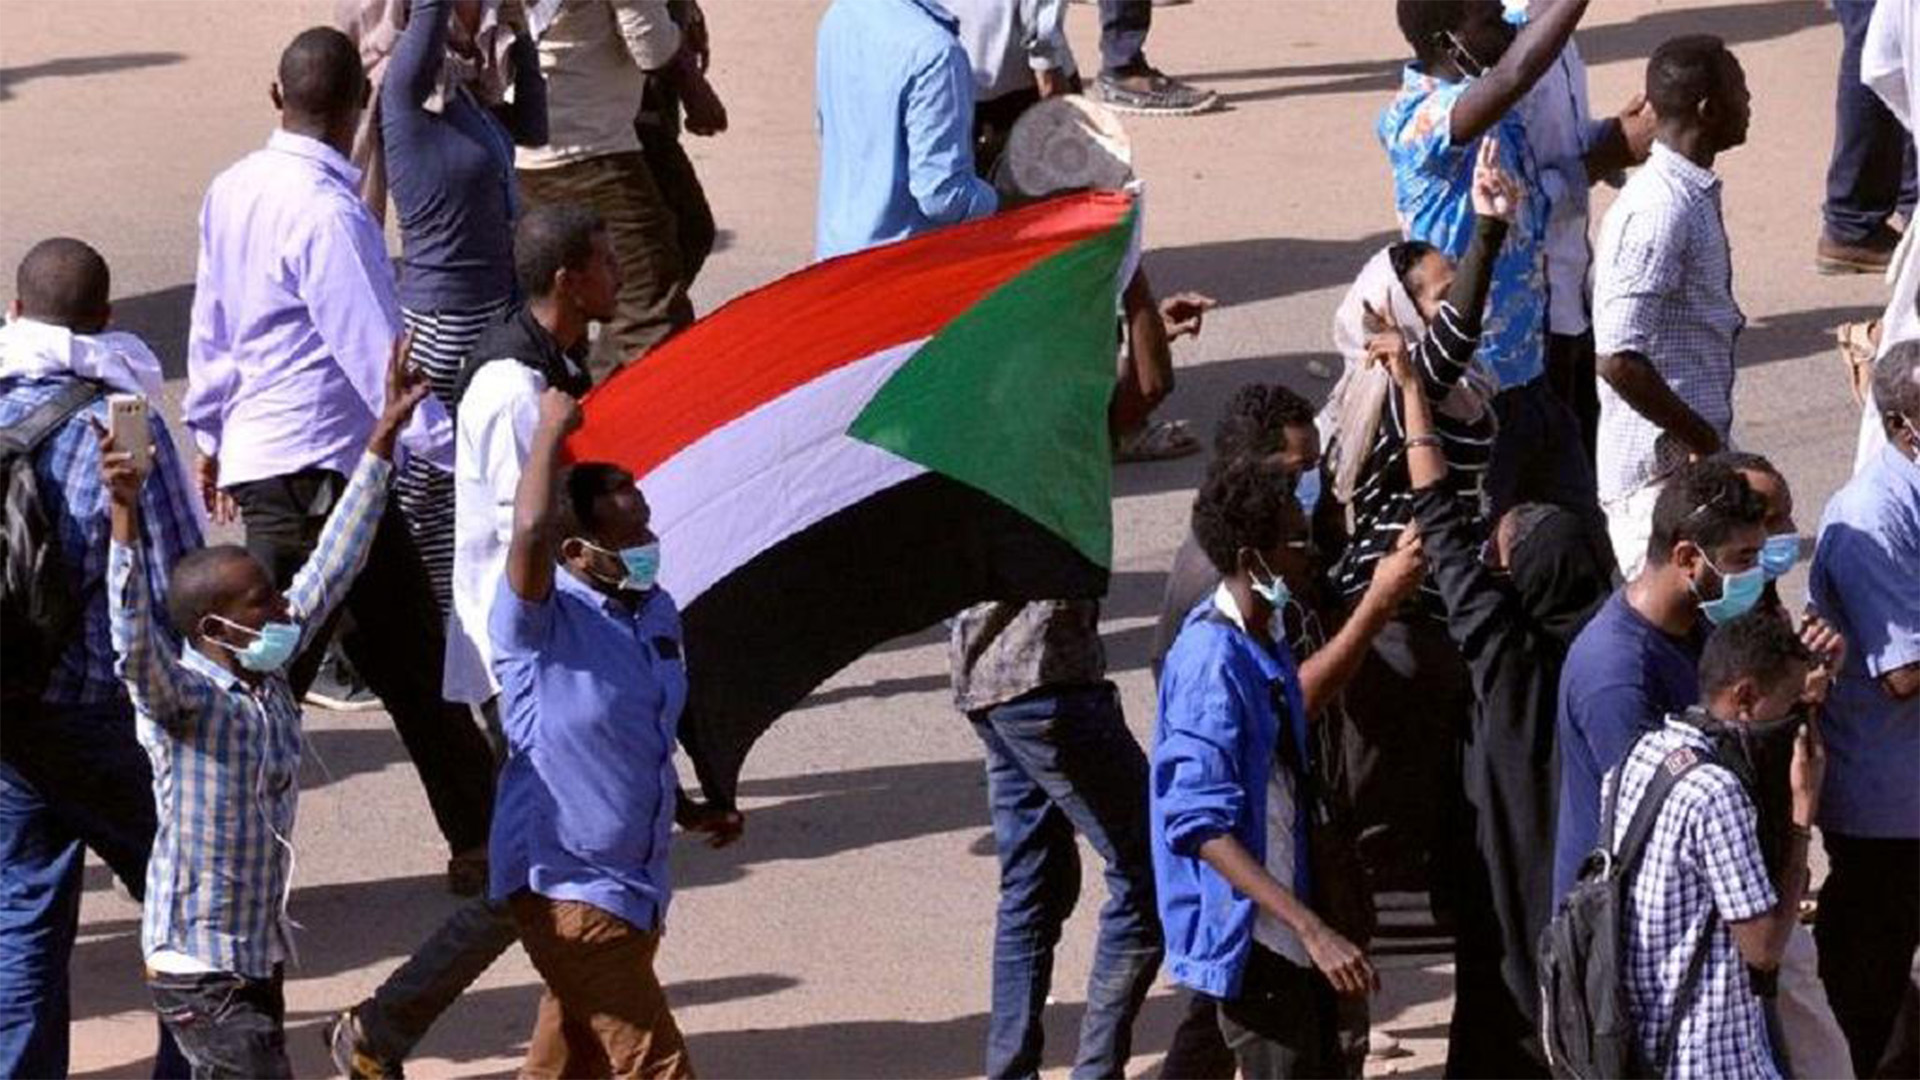 Sudan protest hub Nine opposition leaders arrested ahead of fresh protests